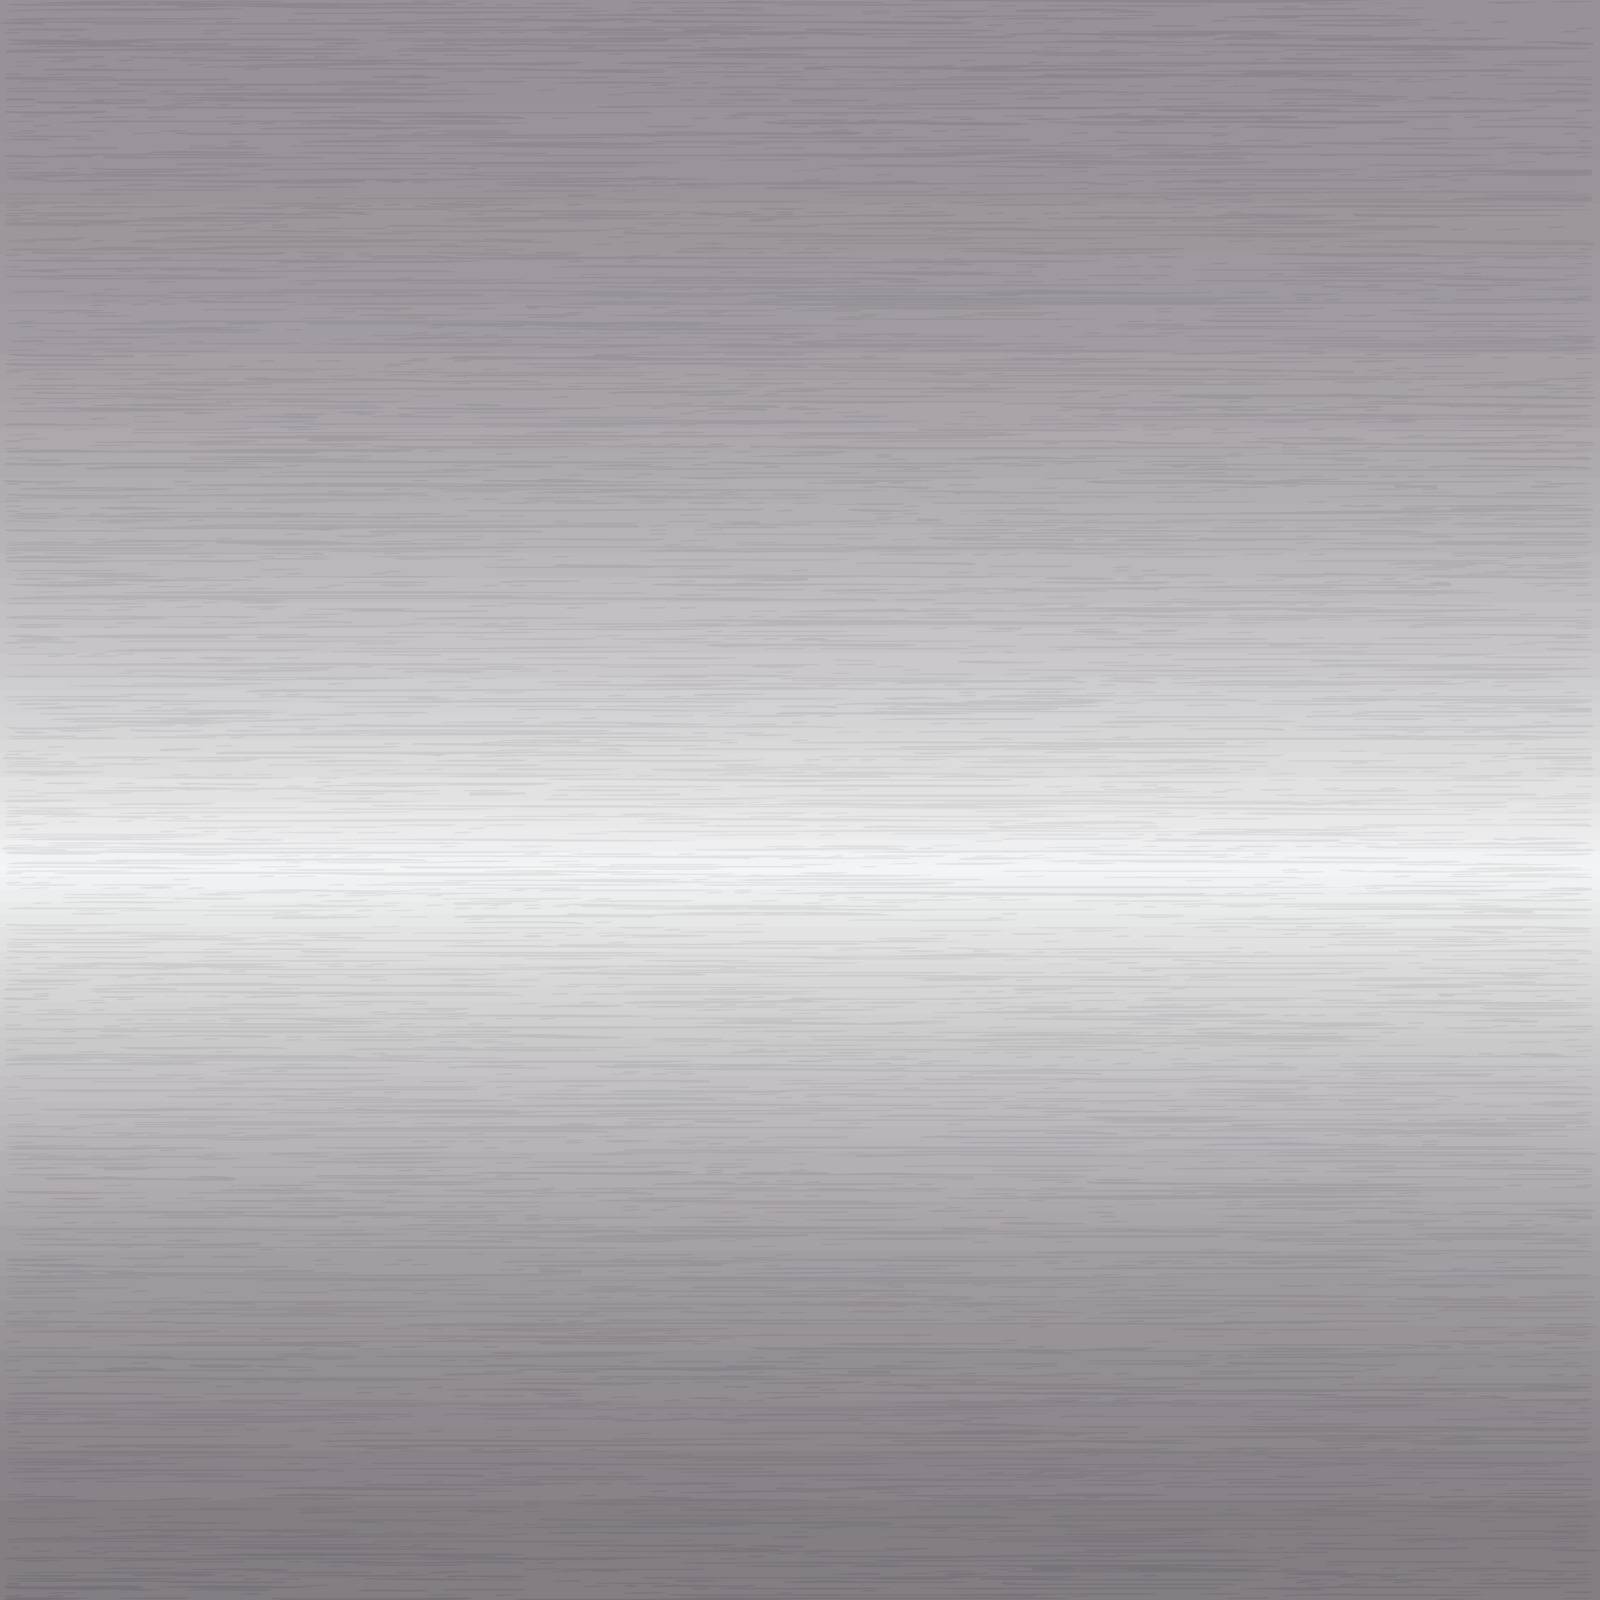 background or texture of brushed silver surface